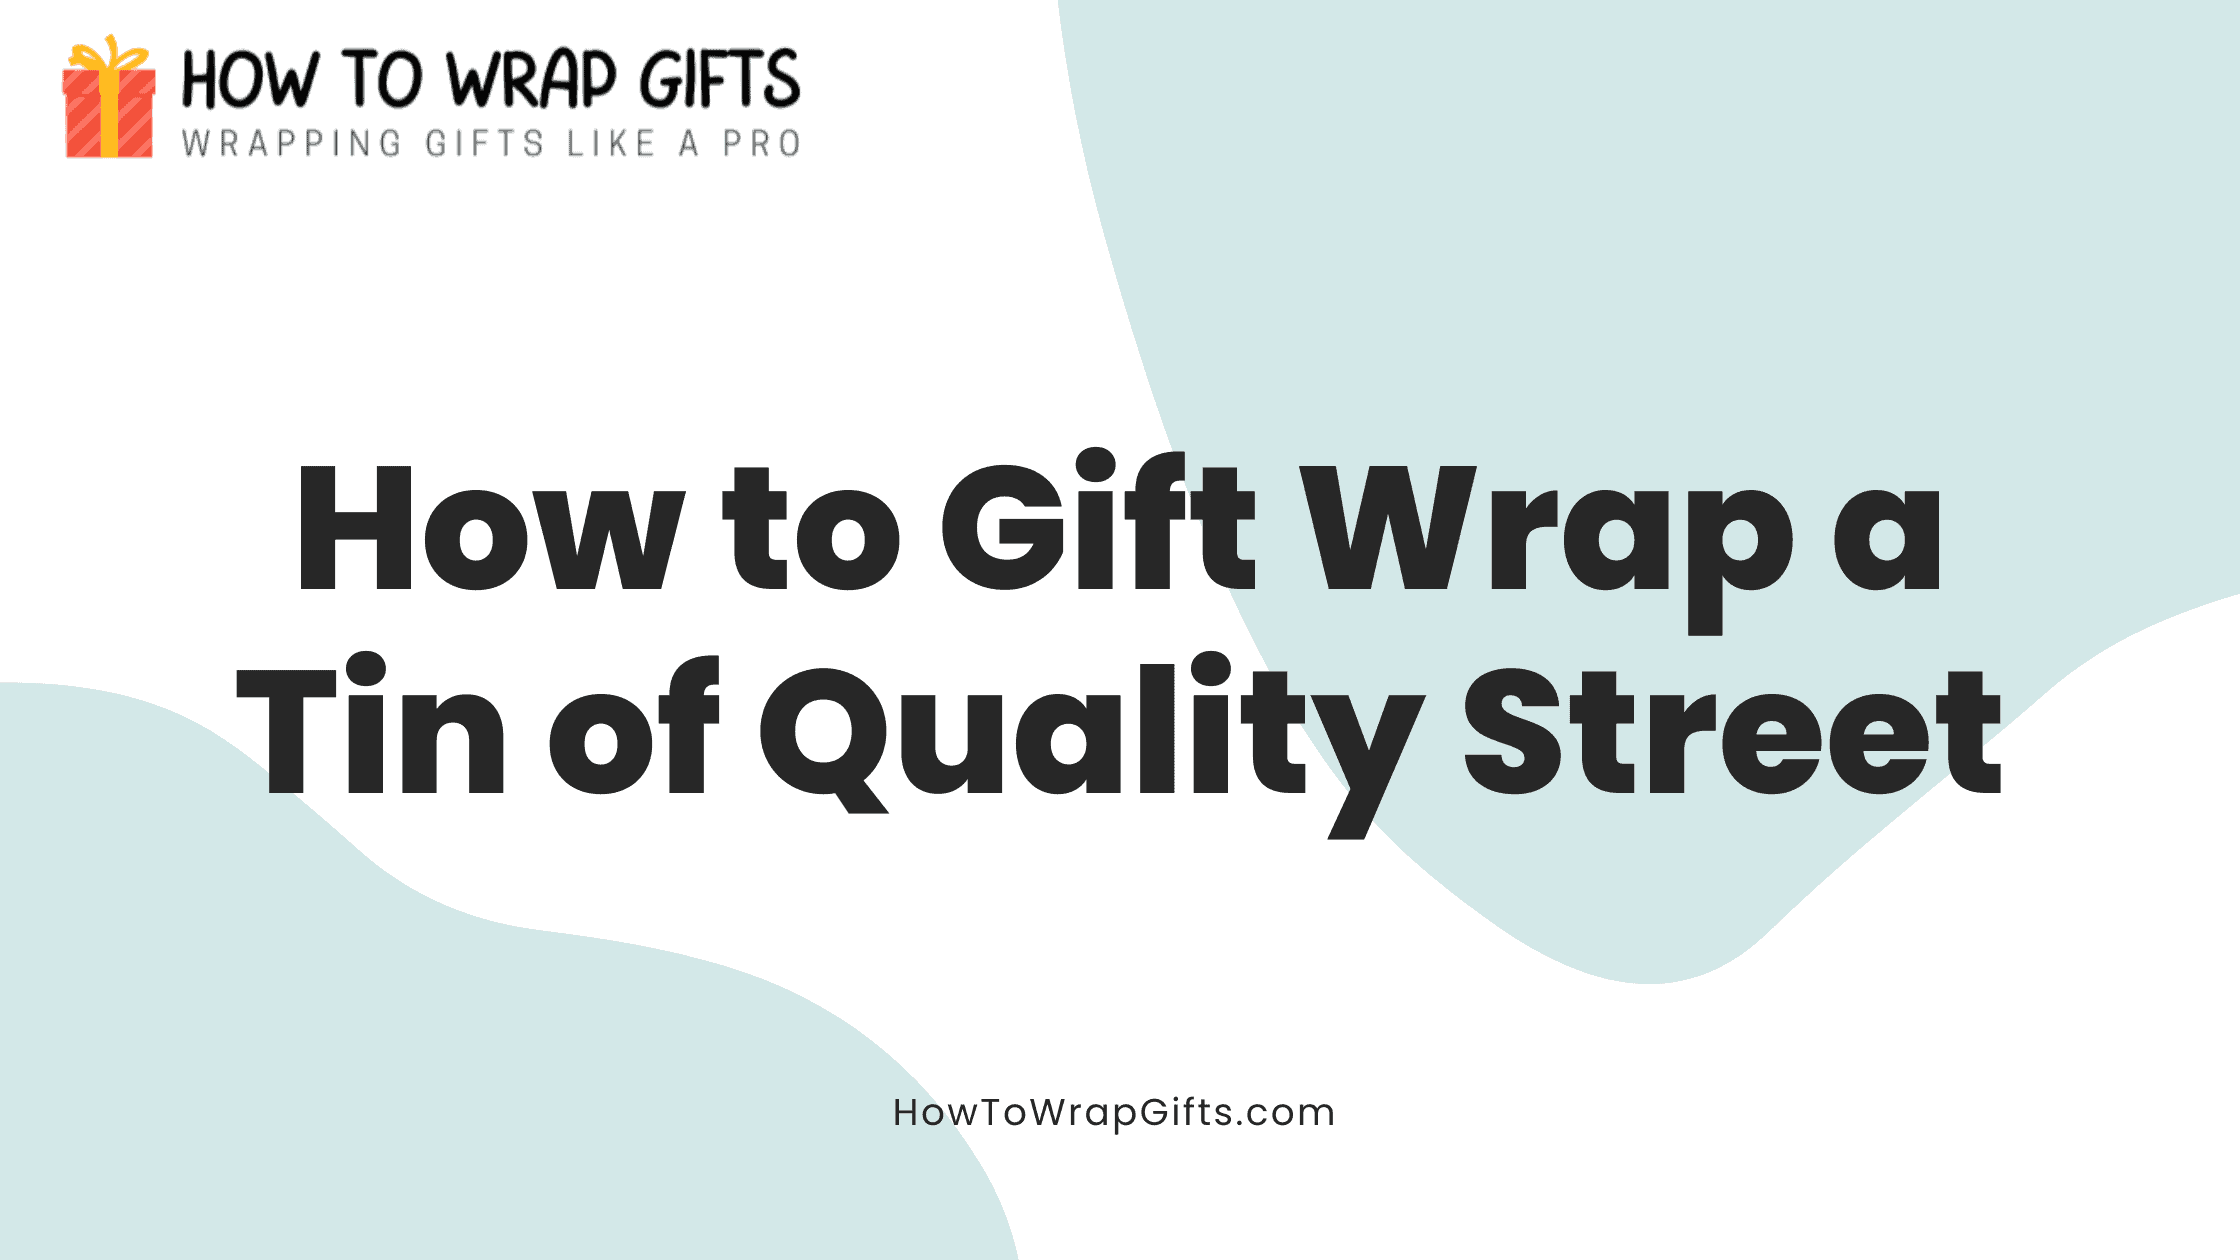 How to Gift Wrap a Tin of Quality Street